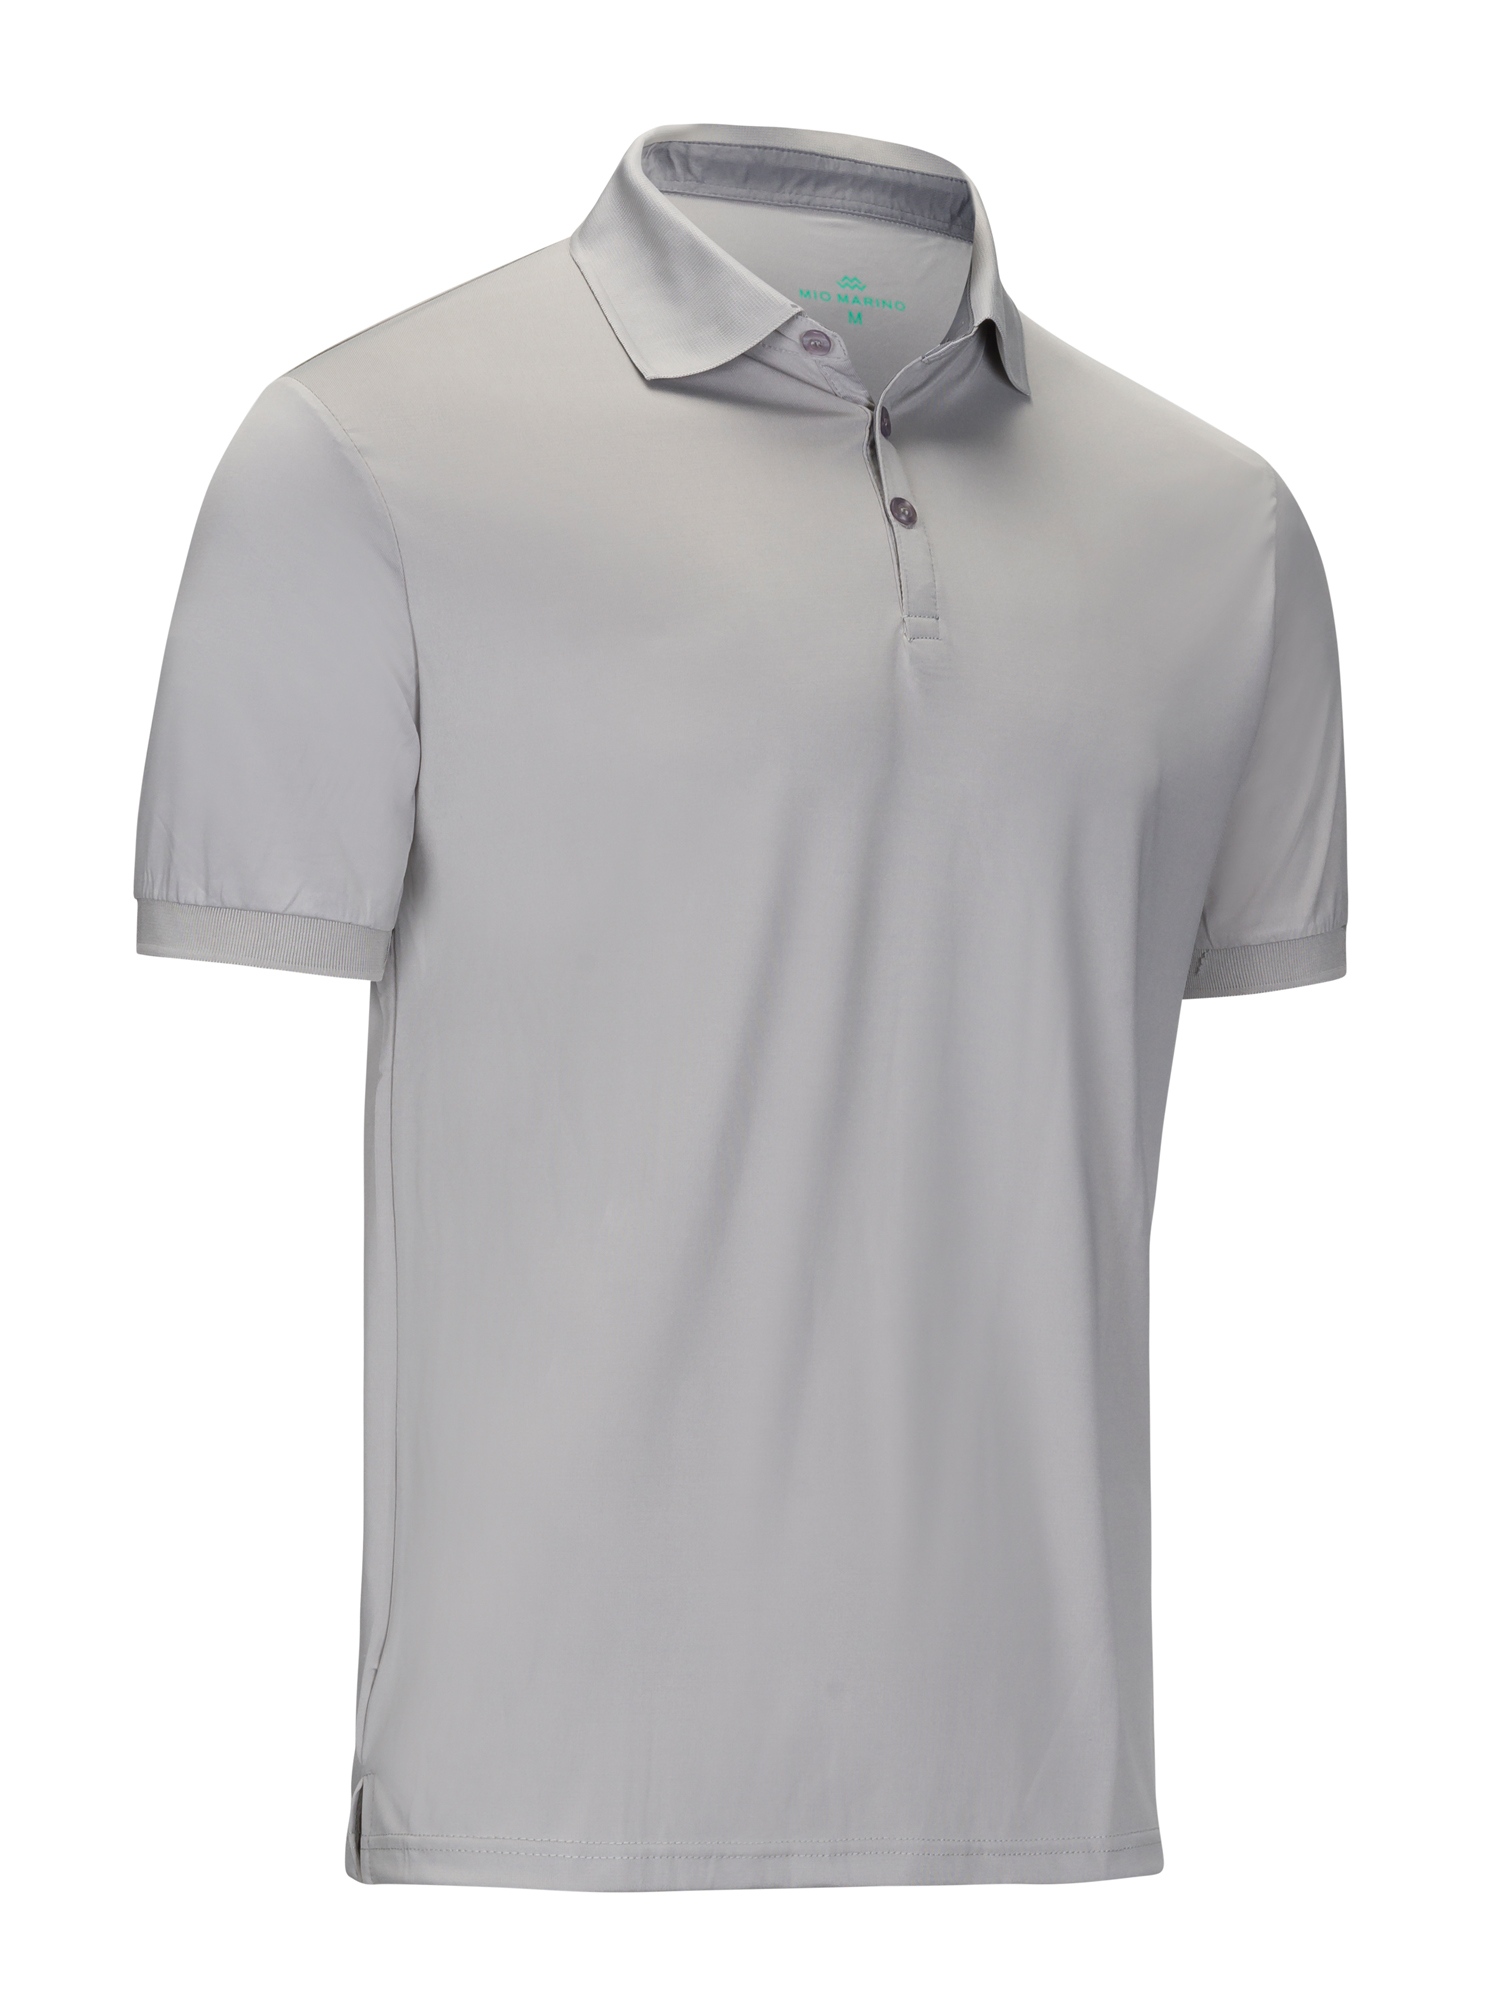 Mio Marino Golf Polo Shirts For Men - Regular-fit Quick-Dry Mens ...